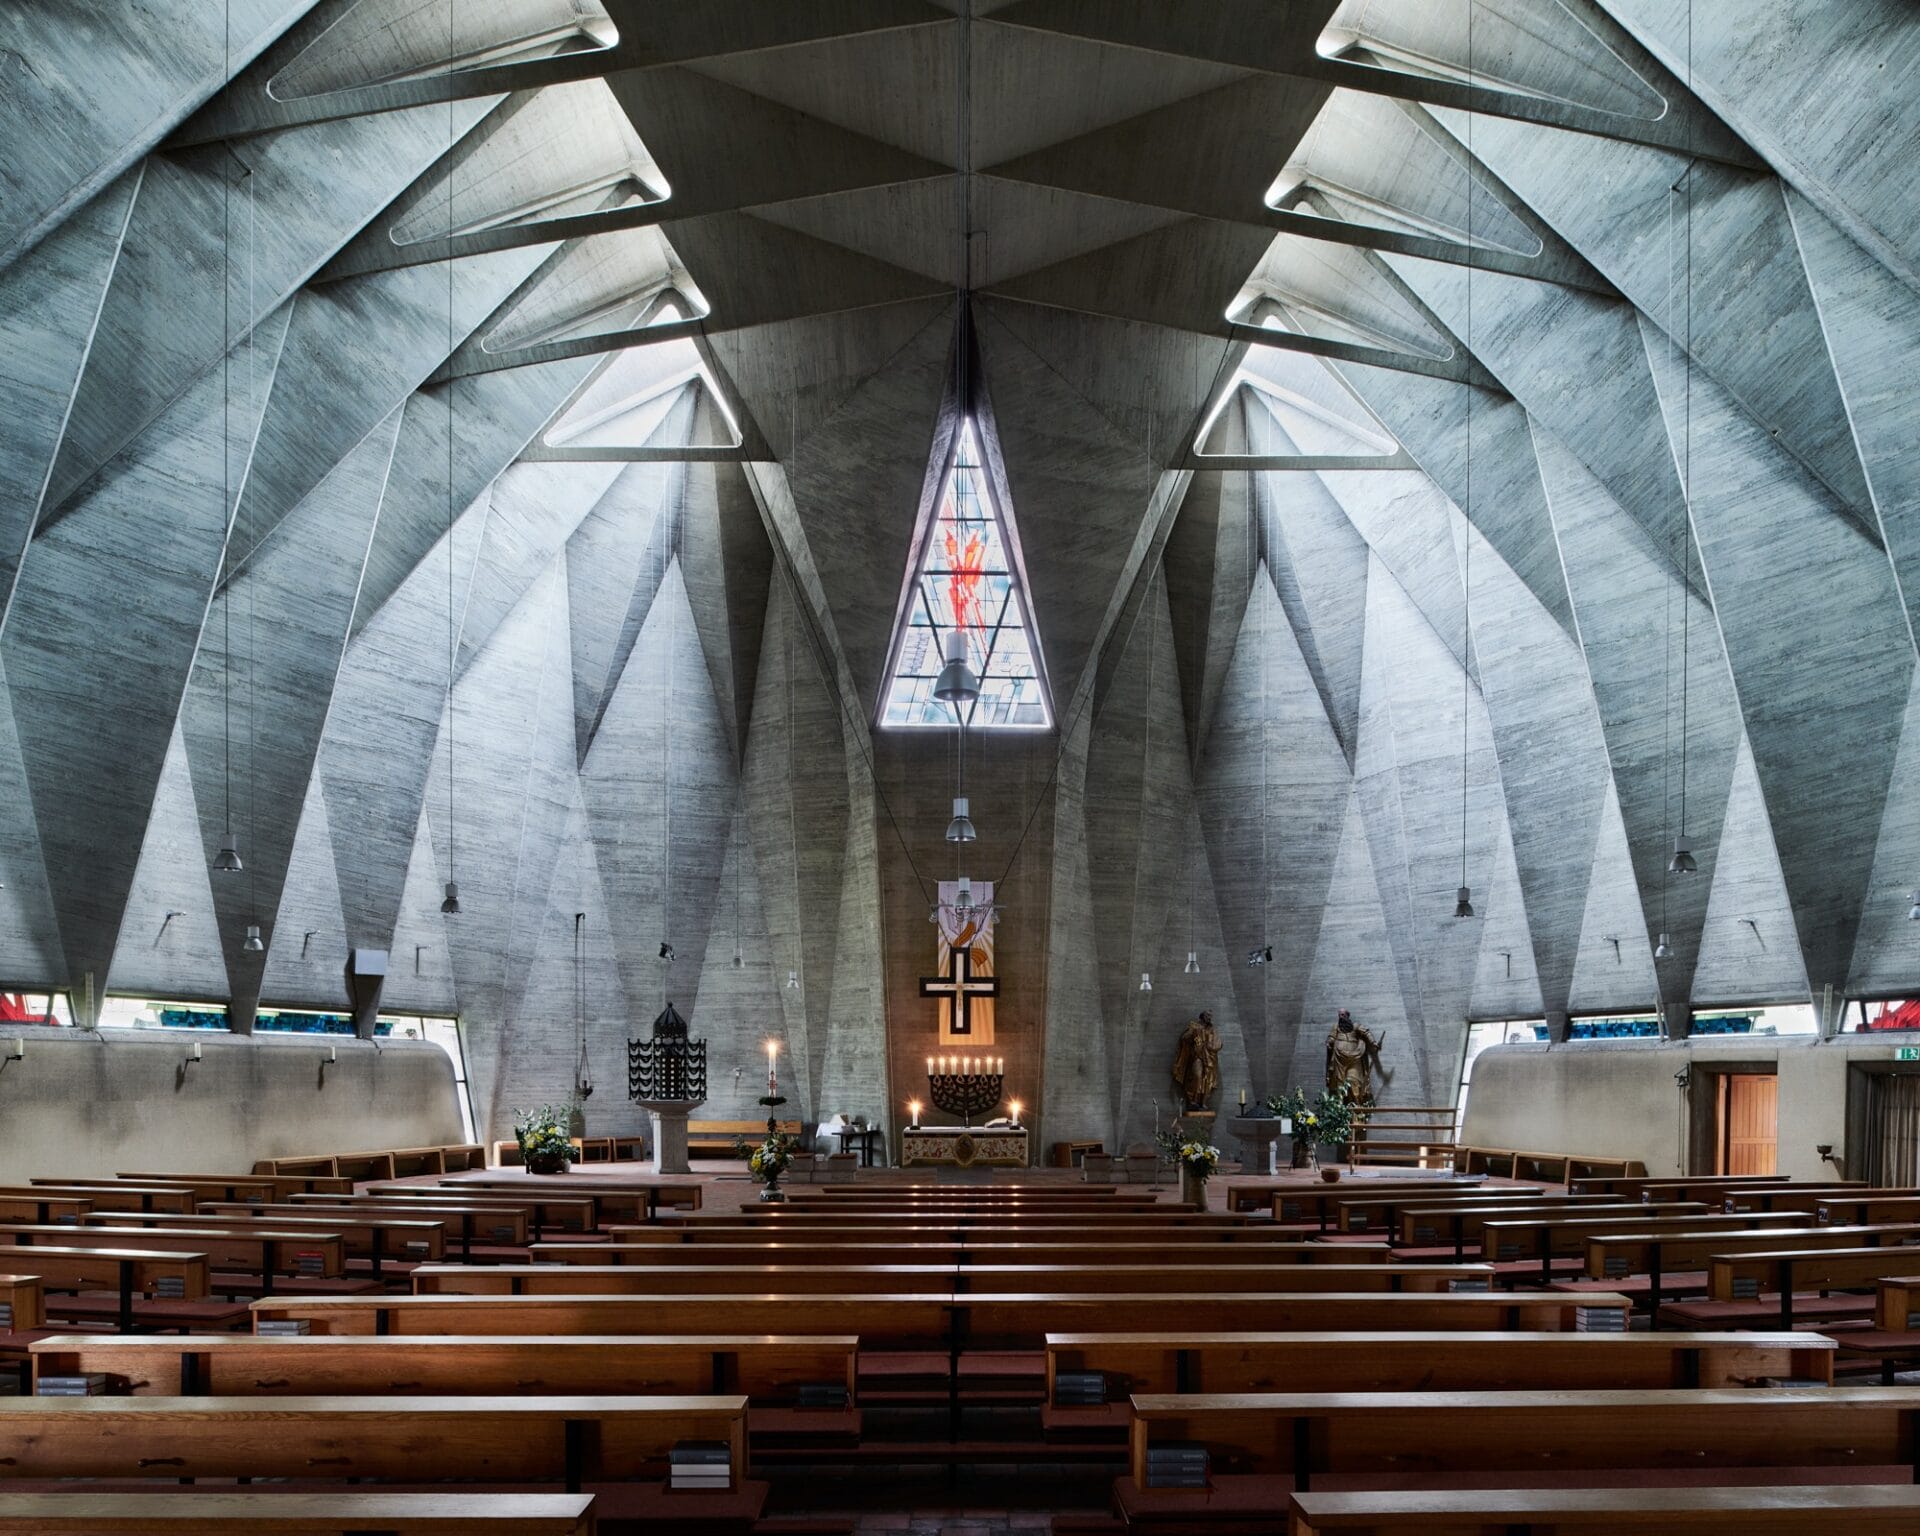 an interior overview of a large brutalist church with angular concrete walls, a clerestory, and wooden pews